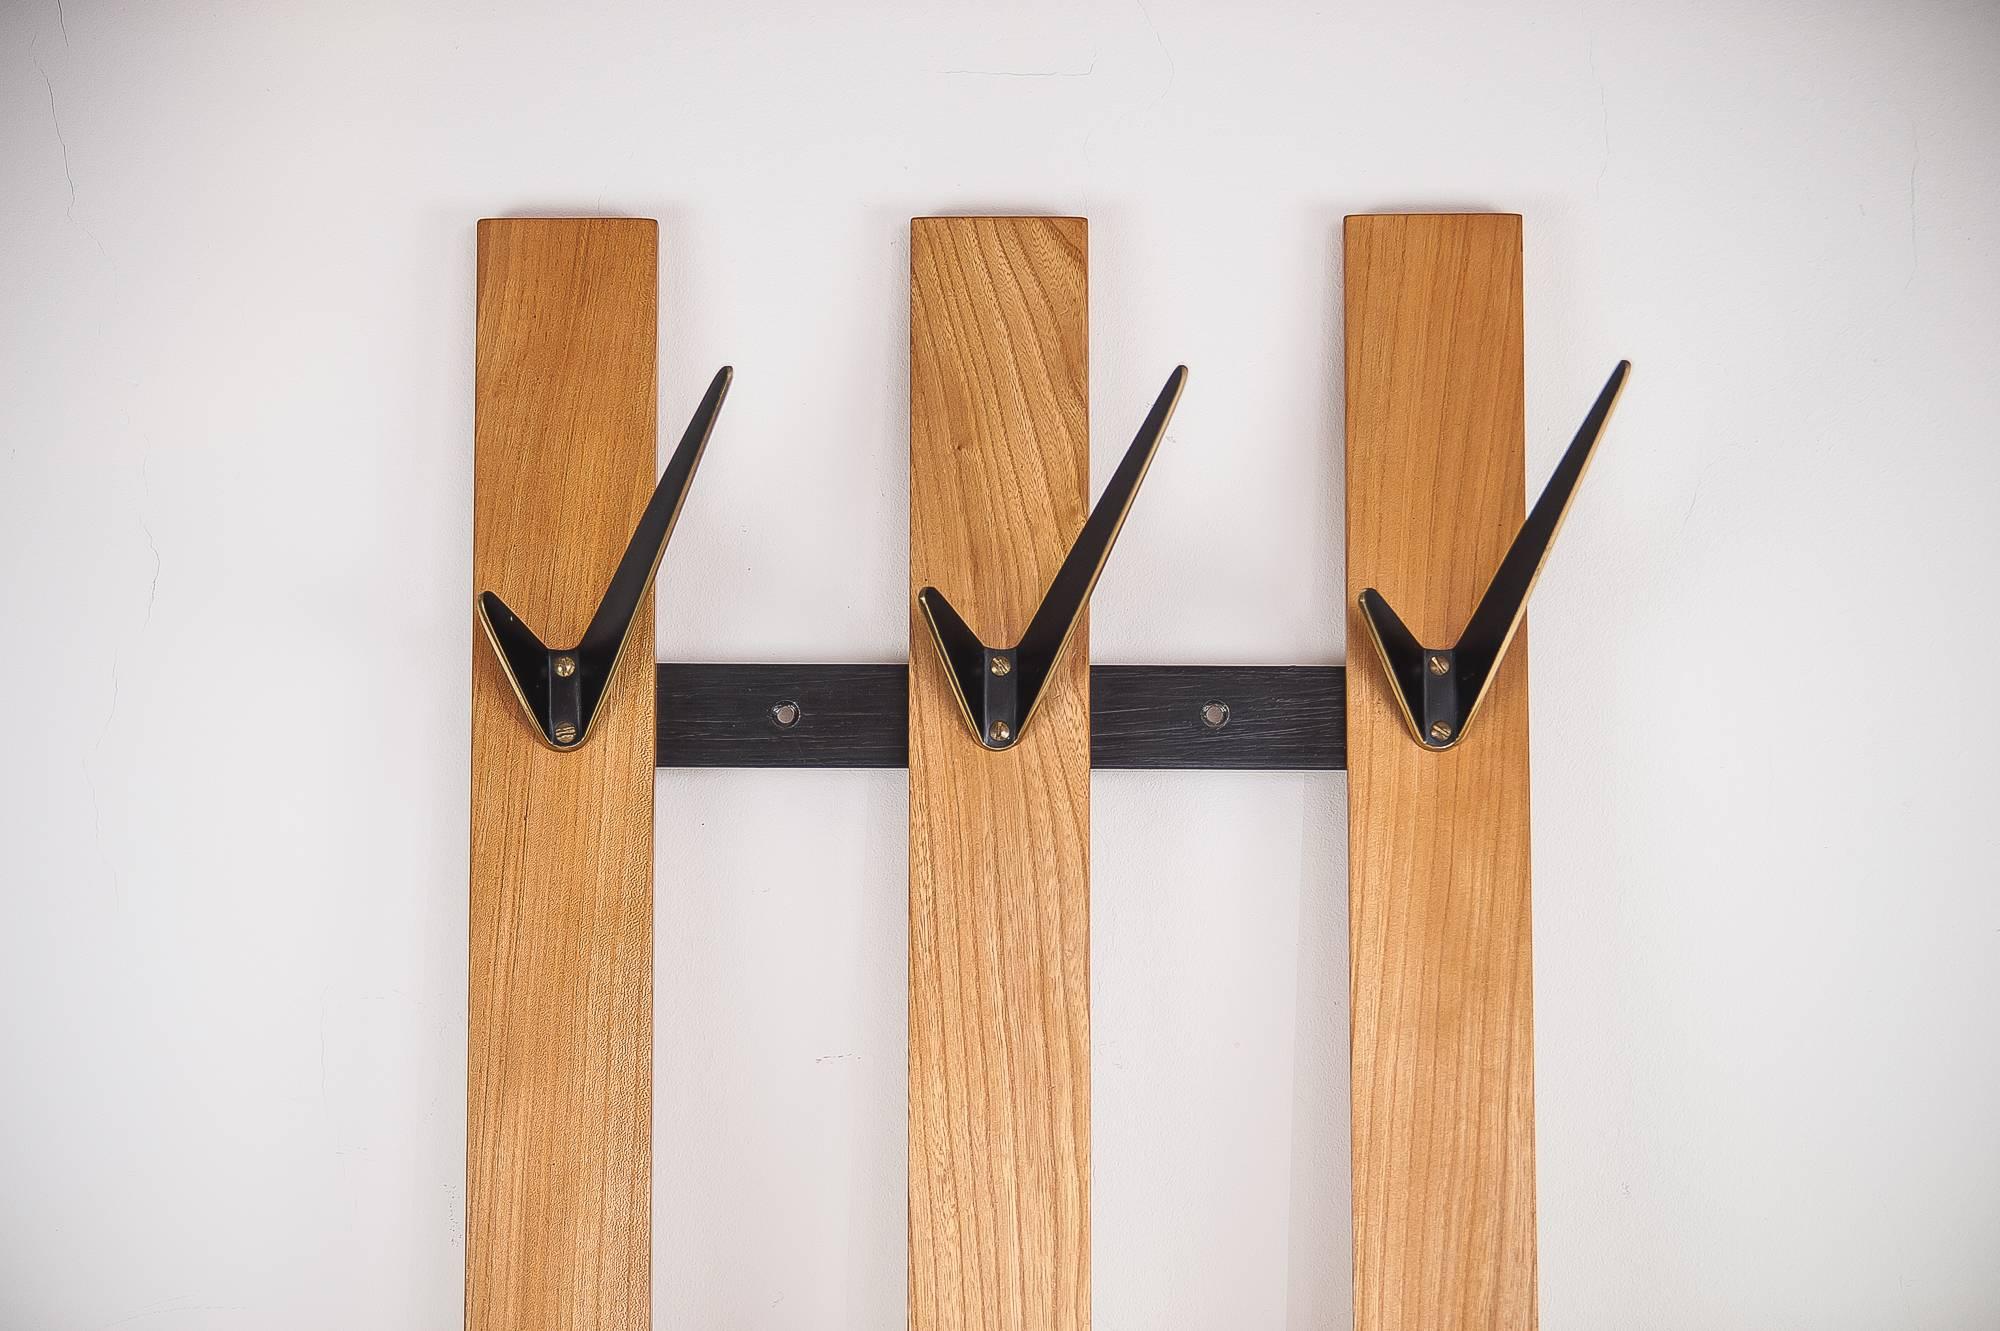 Coat rack cherrywood with hooks by Hertha Baller, circa 1950s

Excellent original condition.